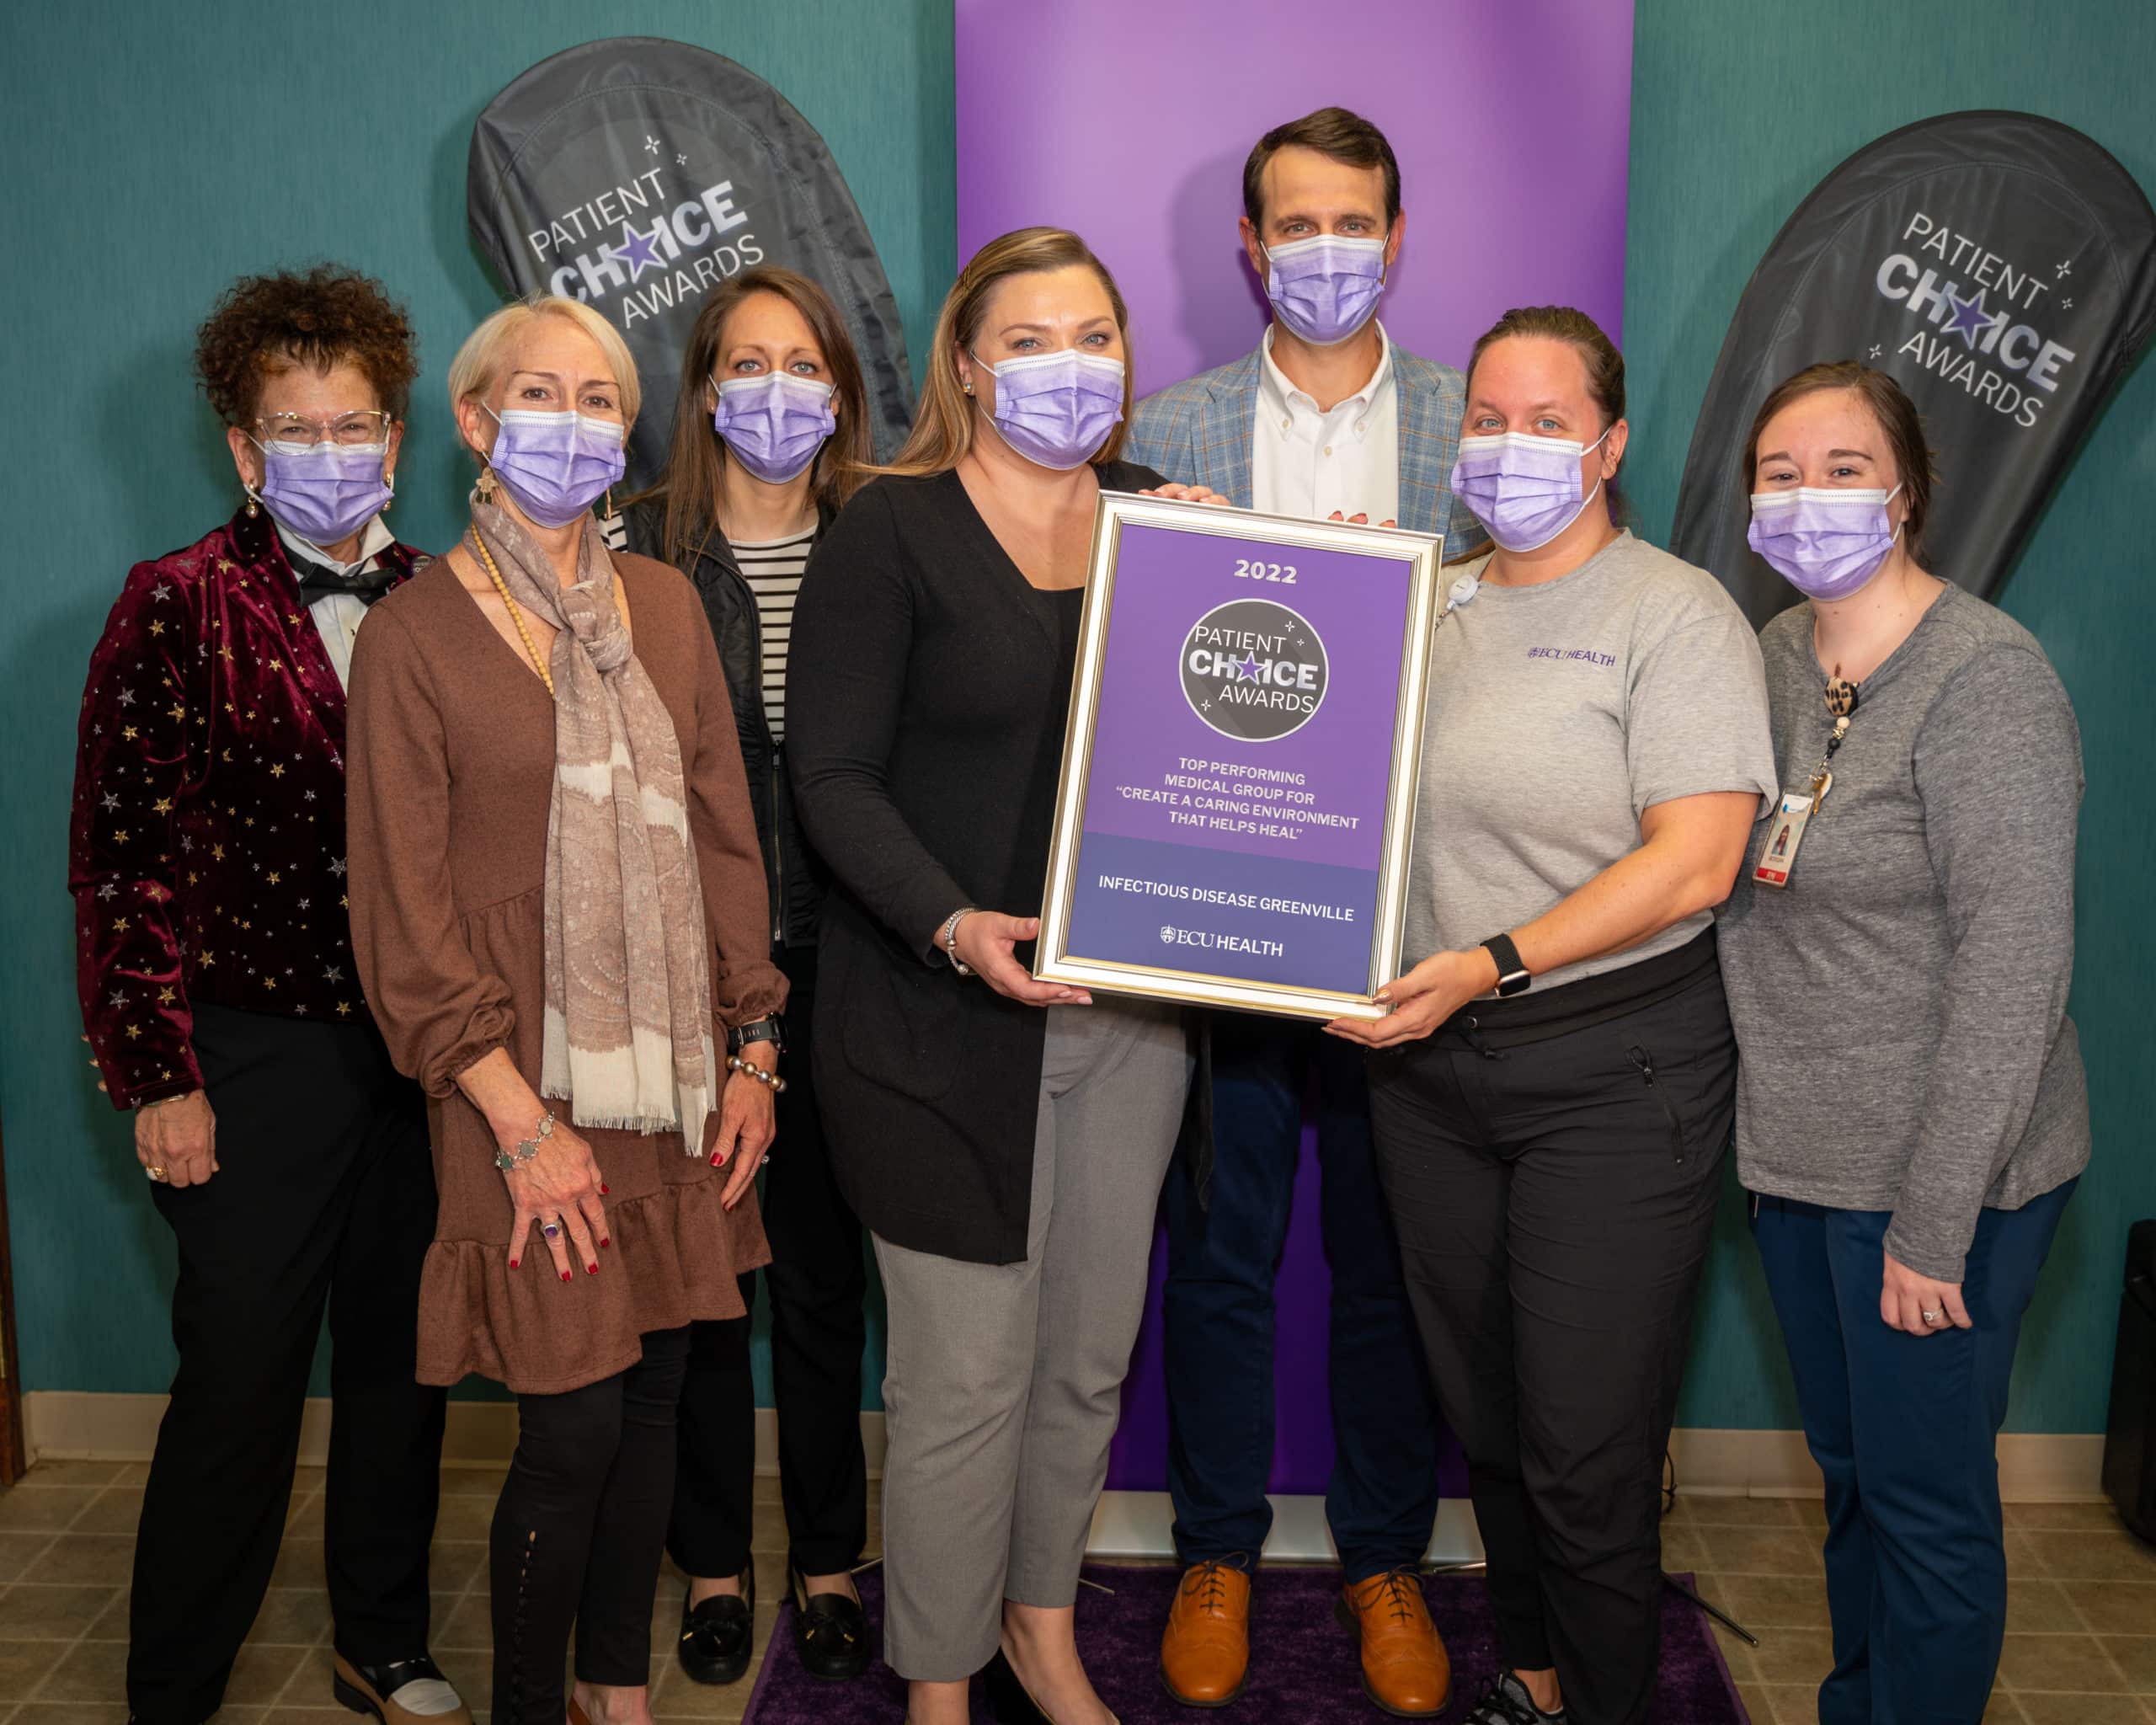 The ECU Health Infectious Disease – Greenville poses for a photo after winning the Patient Choice Award for Top Performing Medical Group for Creating a Caring Environment that Helps Heal.